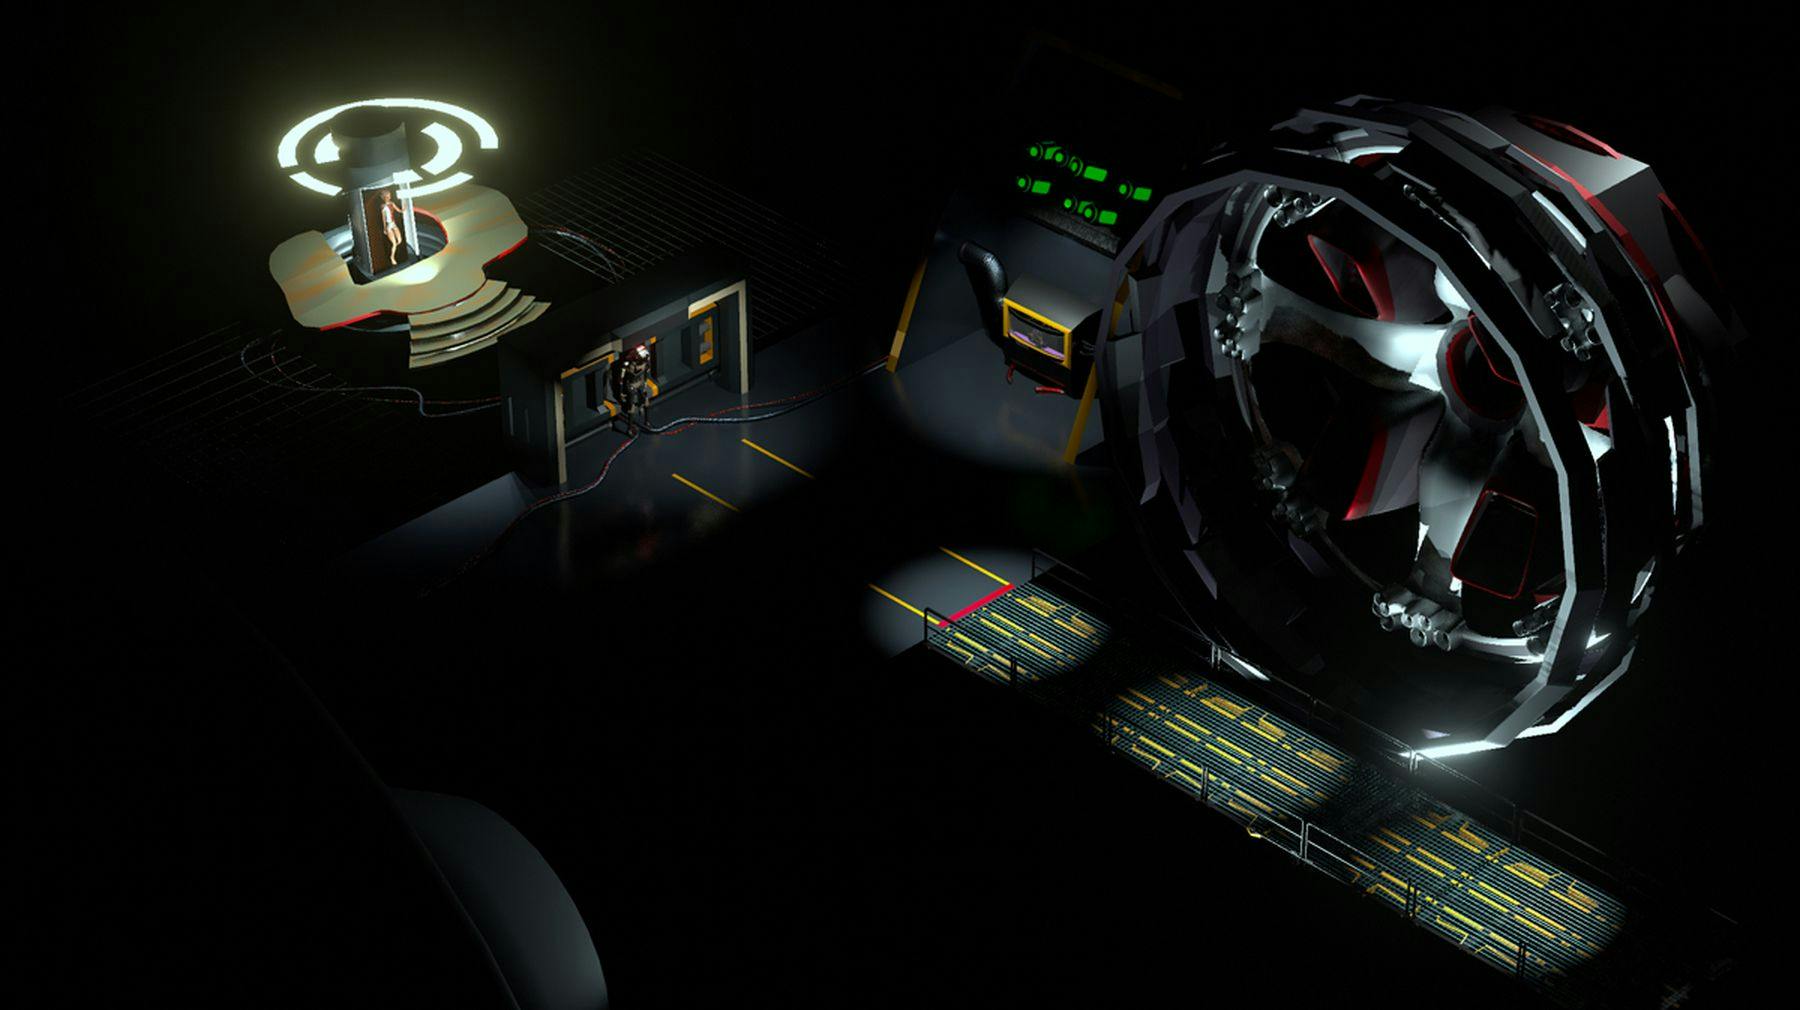 A digital drawing of a person and robot walking into a black room filled with machinery. There is a walkway in the middle of the room, to the side of it is a large wheel-like apparatus. Next to it is a desk and chair with green lights.